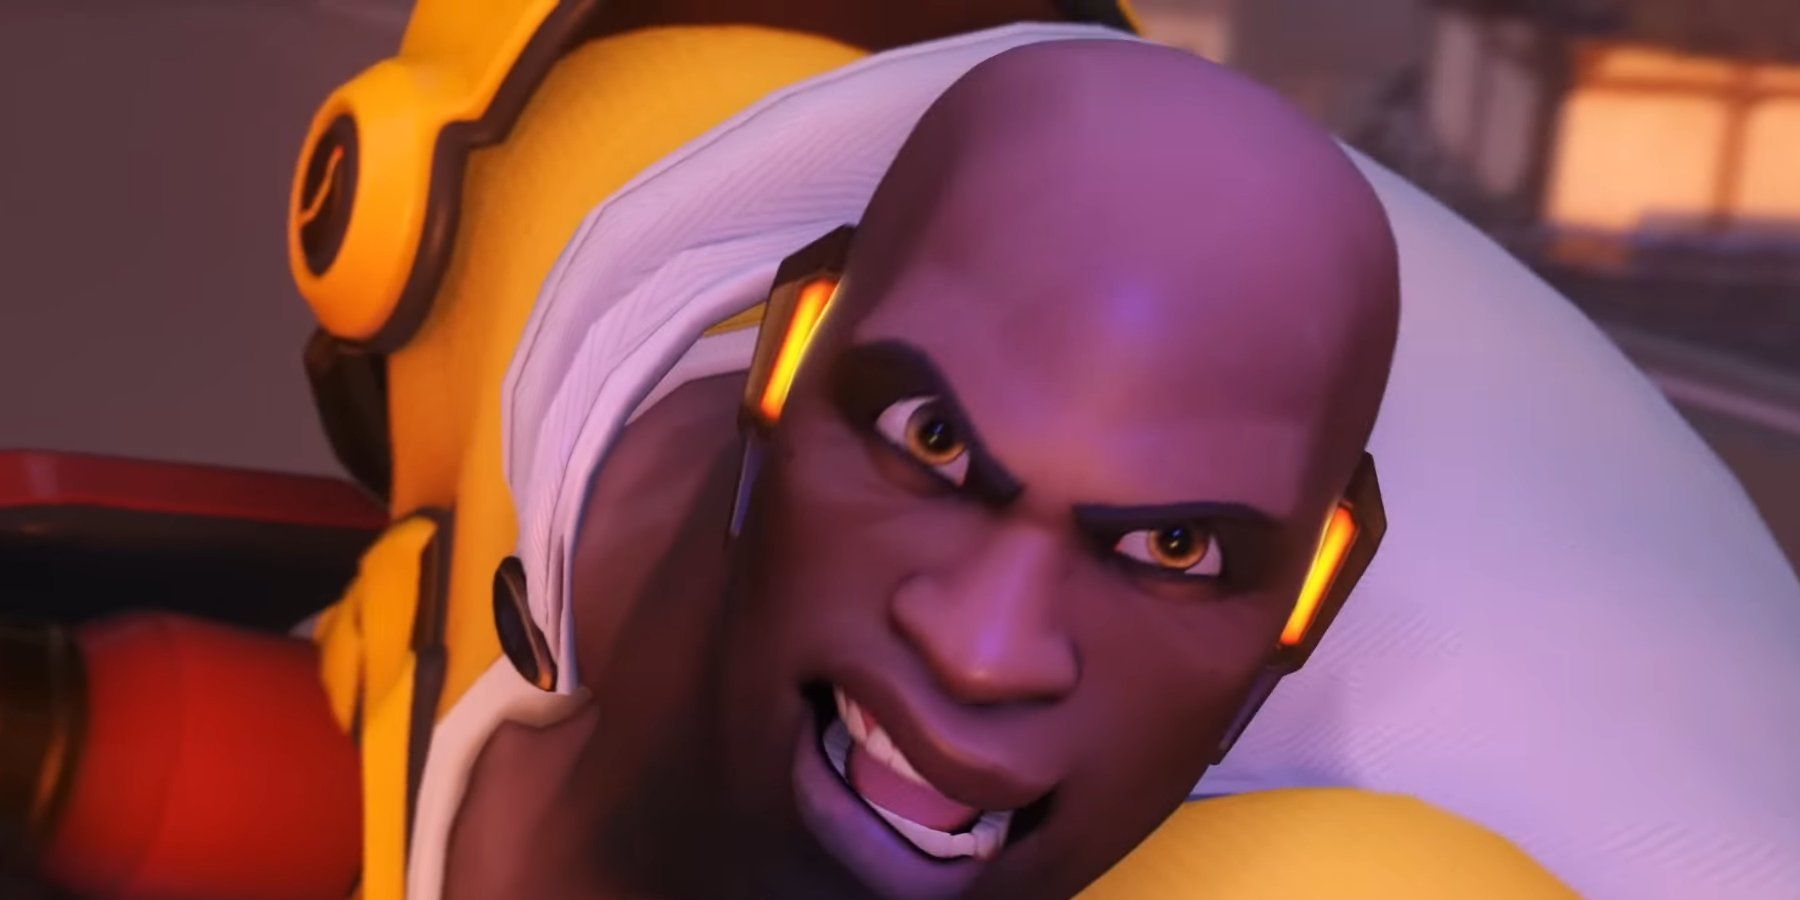 Doomfist as the anime hero One-Punch Man in Overwatch 2.